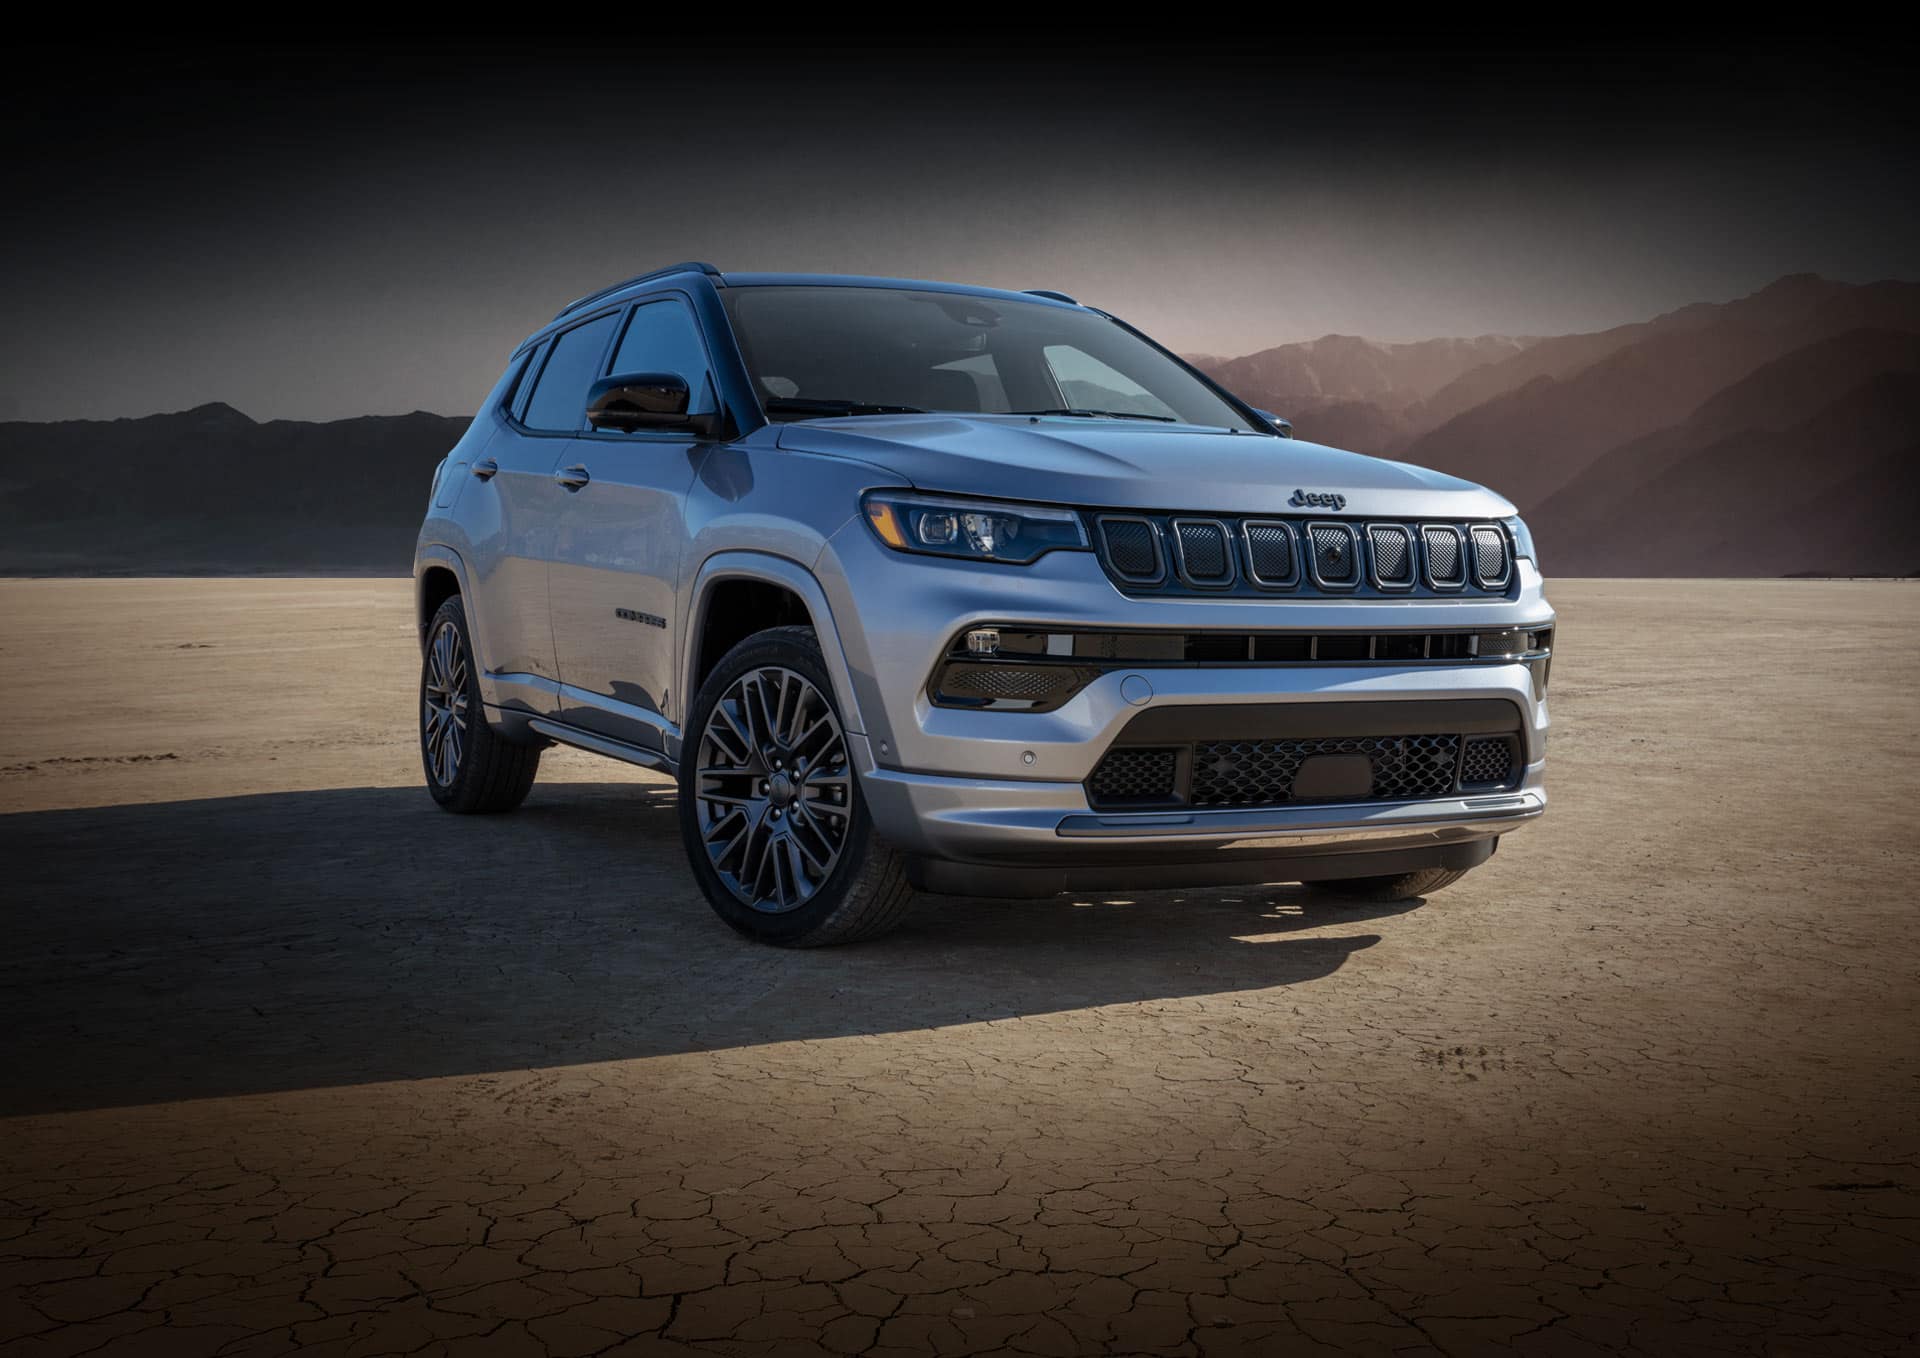 The 2022 Jeep Compass High Altitude parked in the desert with mountains rising in the distance.